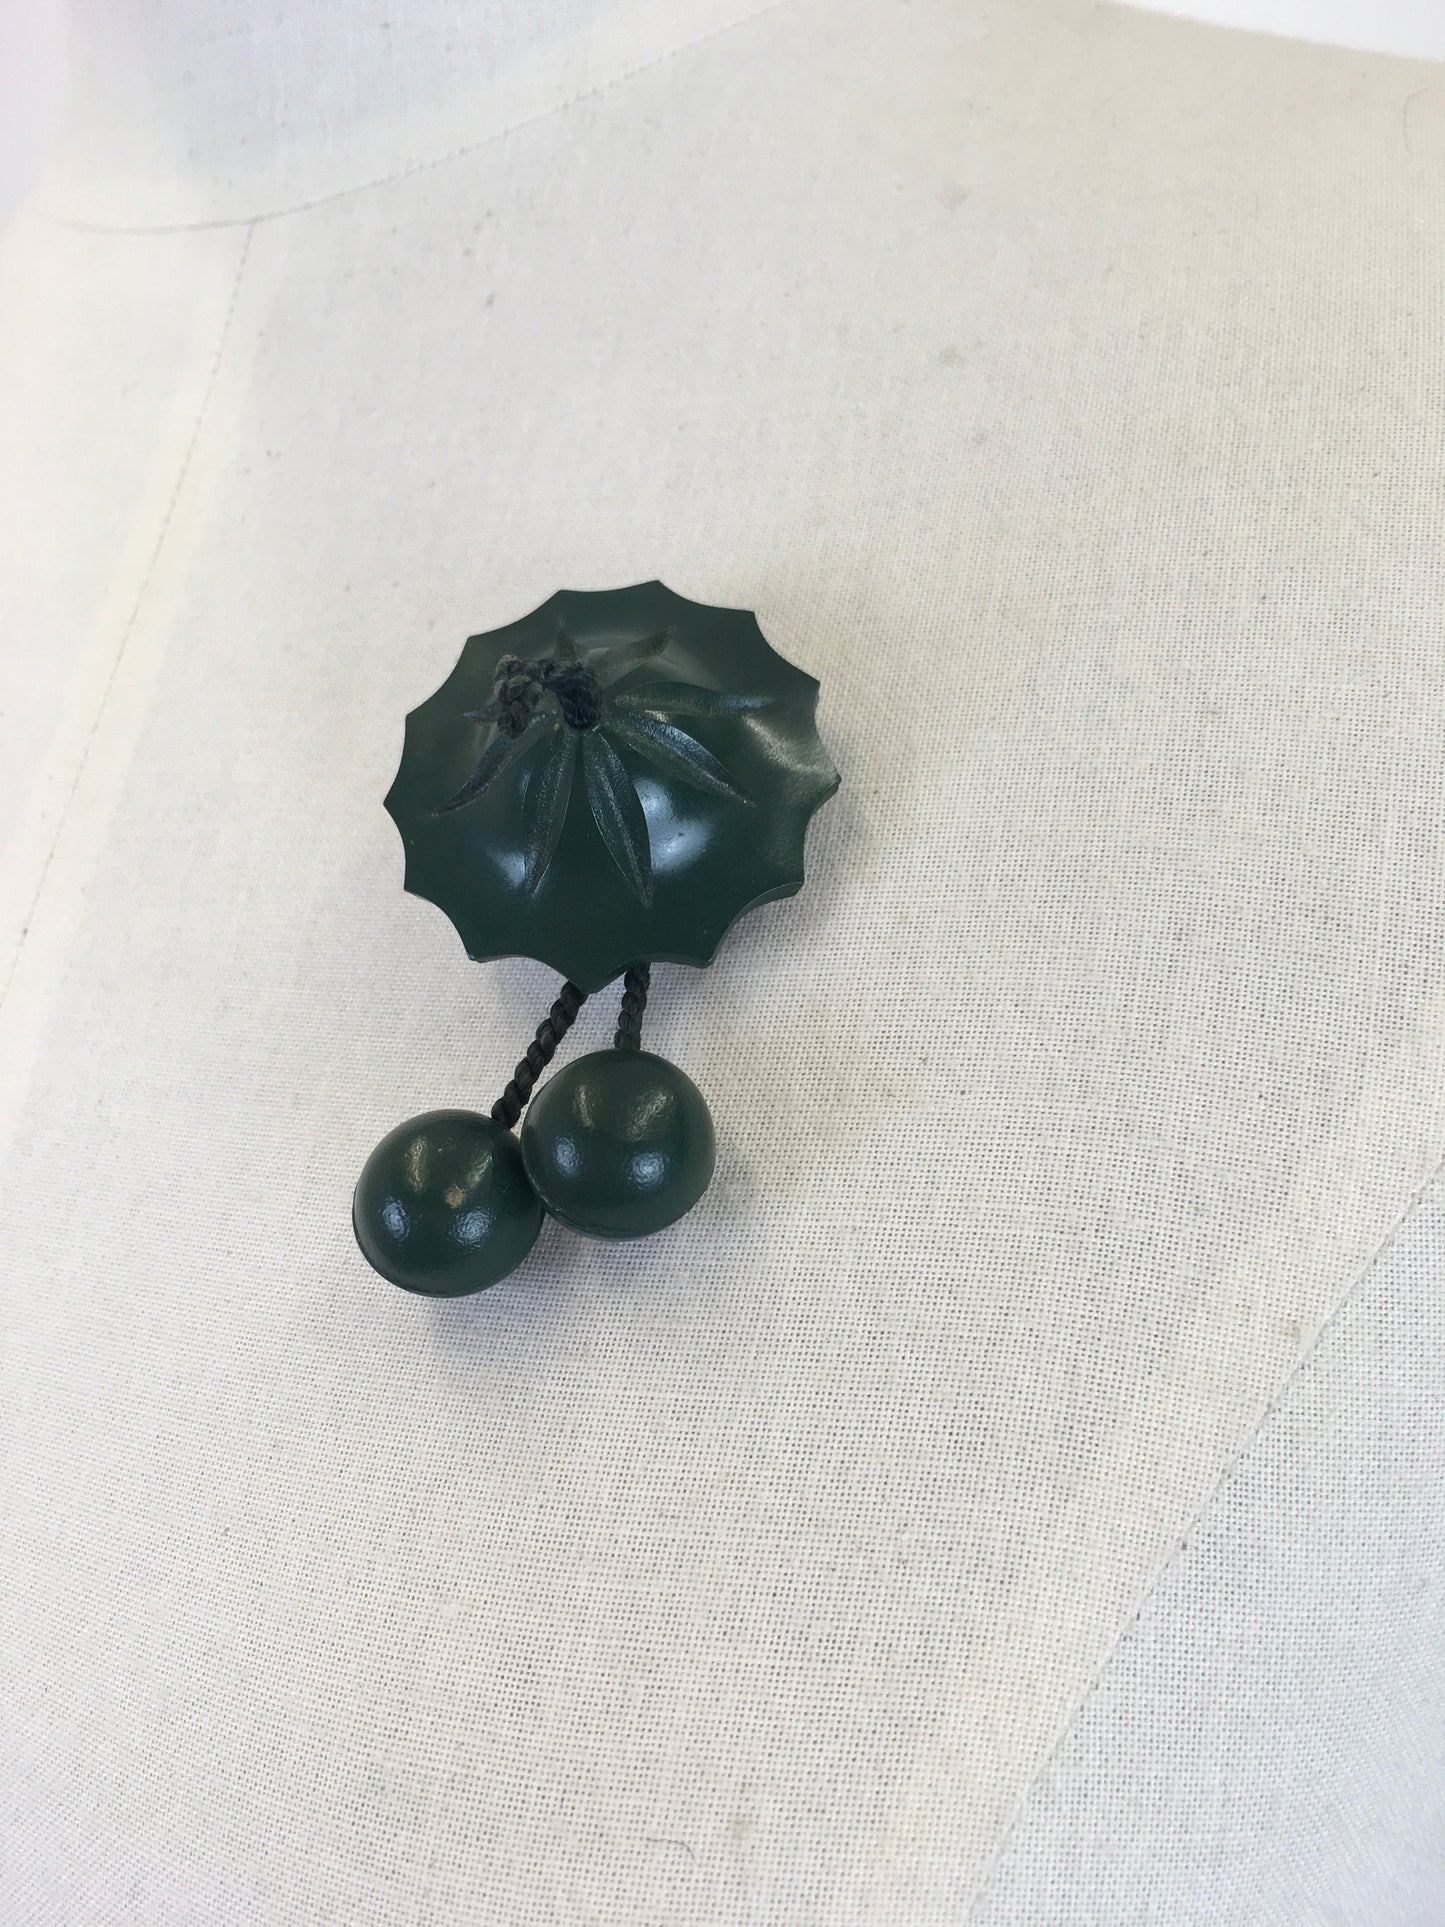 Original 1940’s Early Plastic Brooch in Forest Green - In An Amazing Shape with Dangling Balls